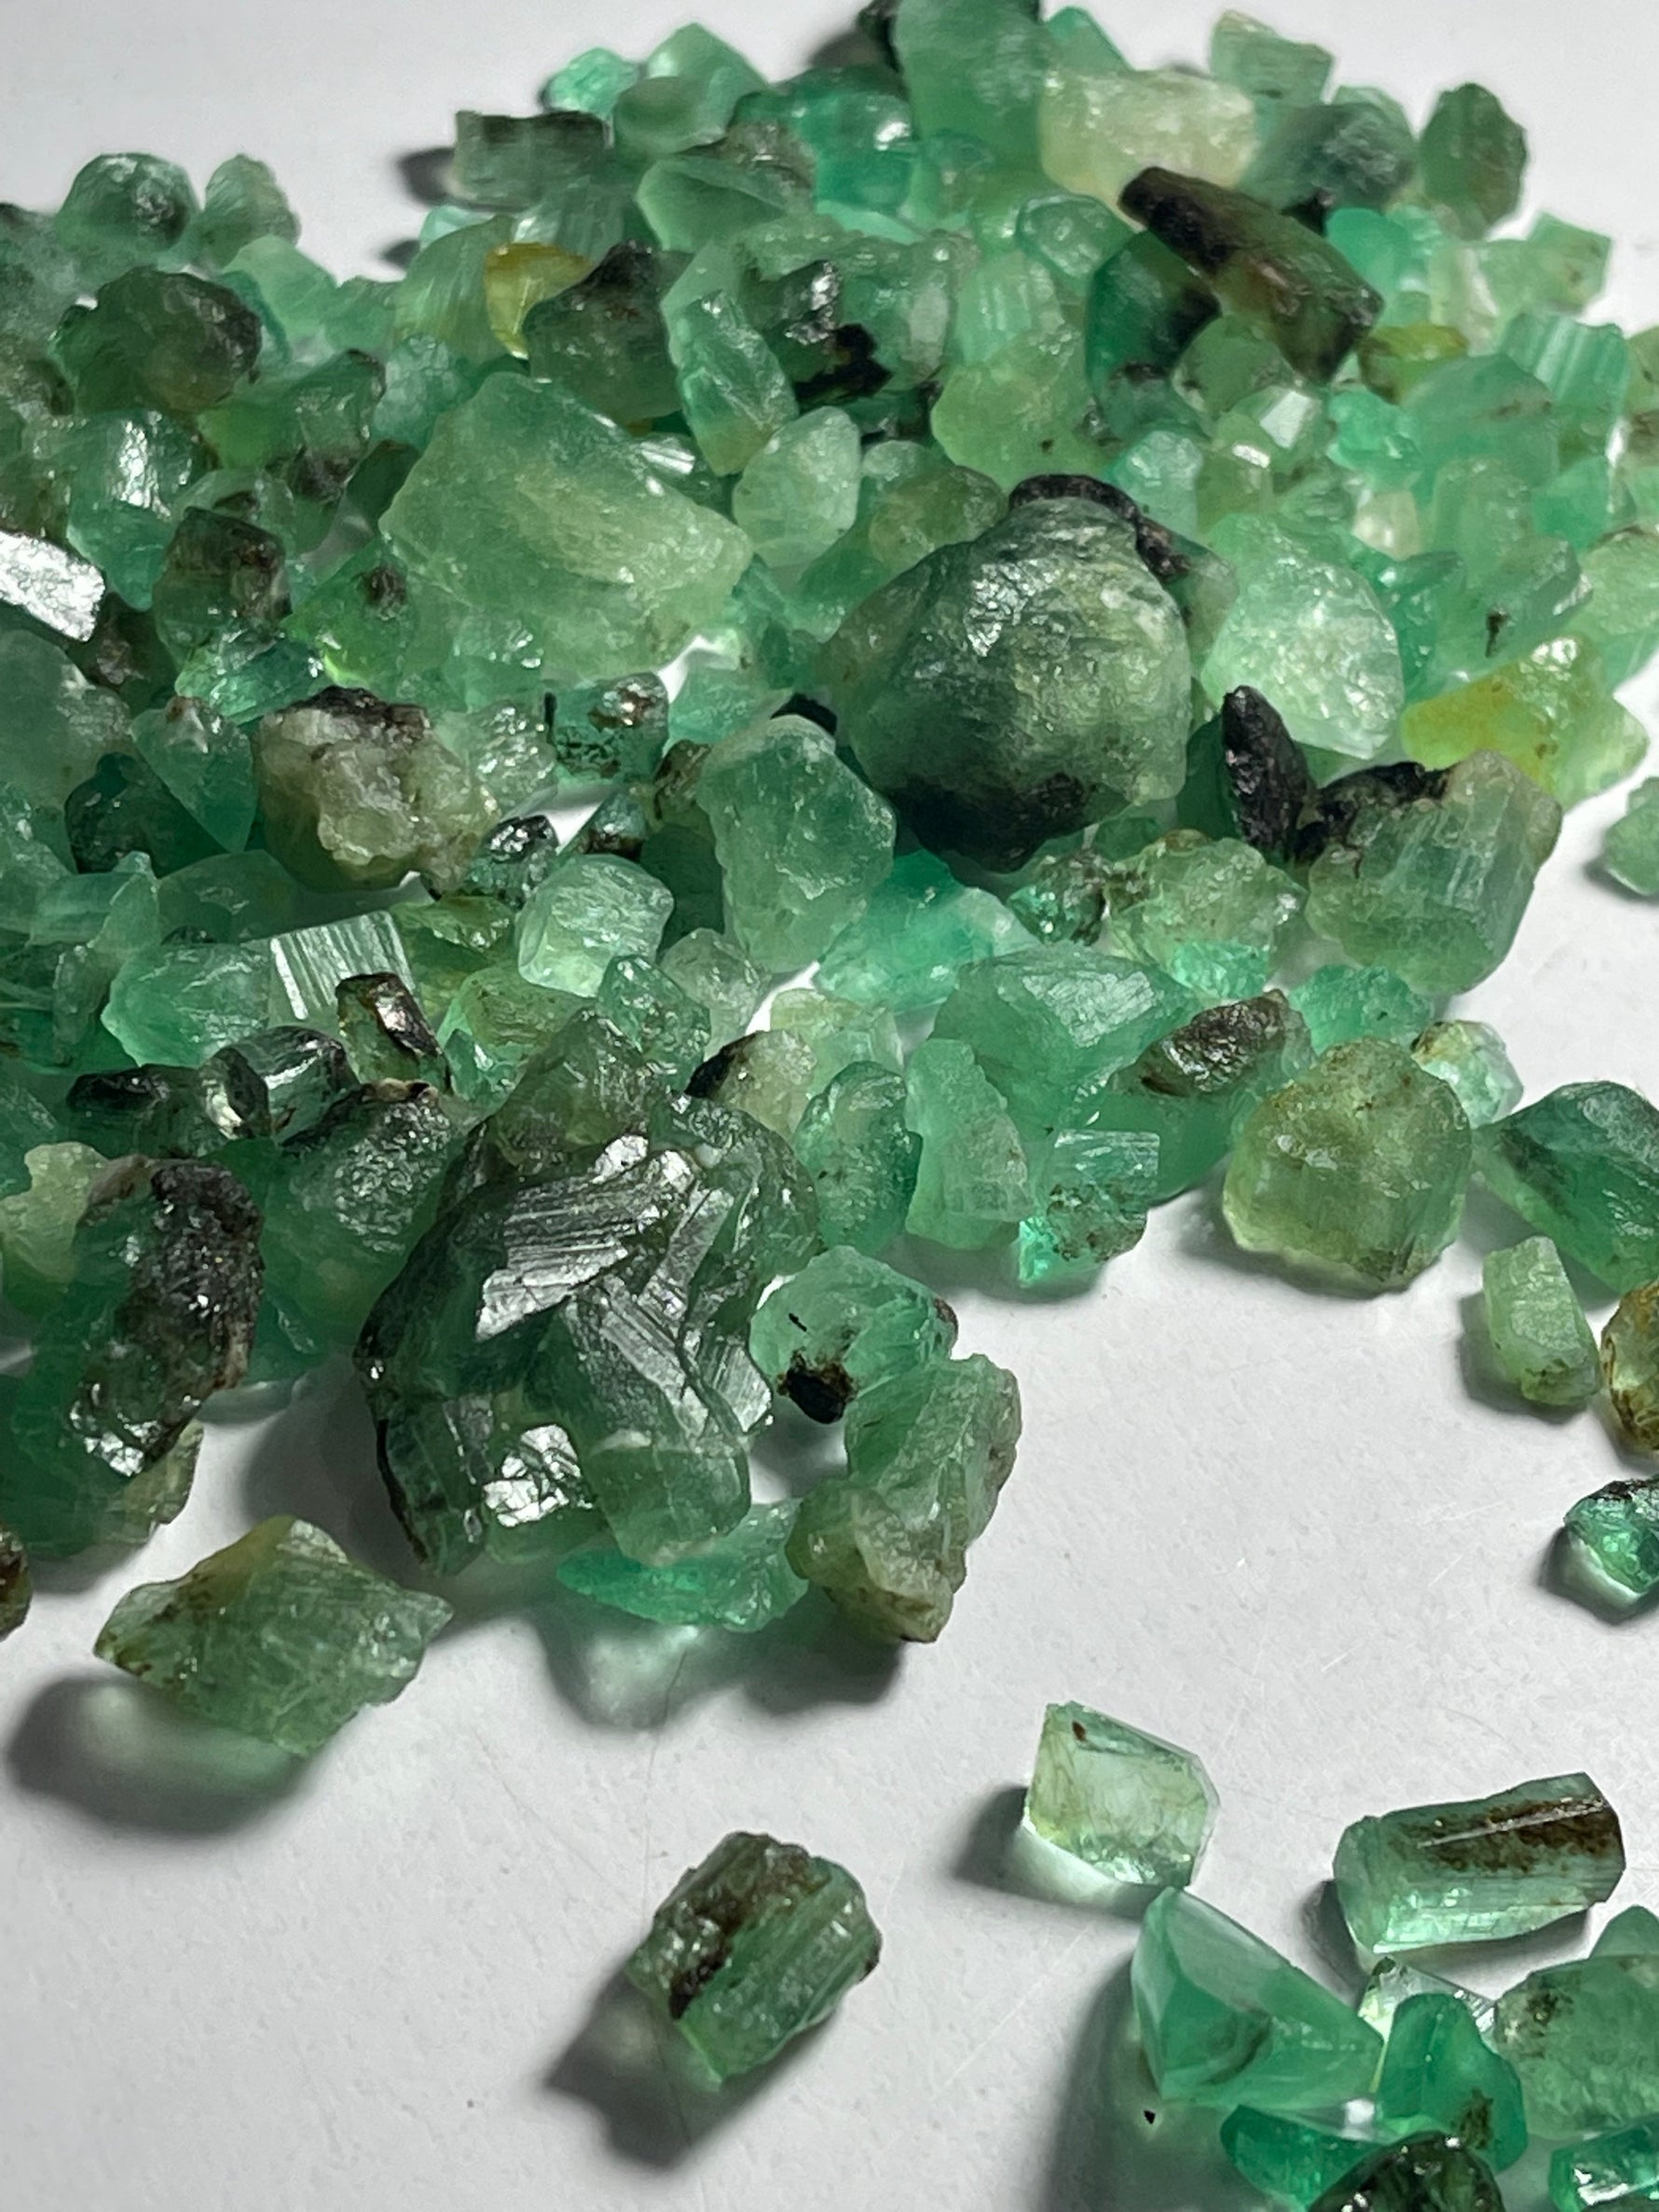 Raw Chitral Emeralds Stones for Sale